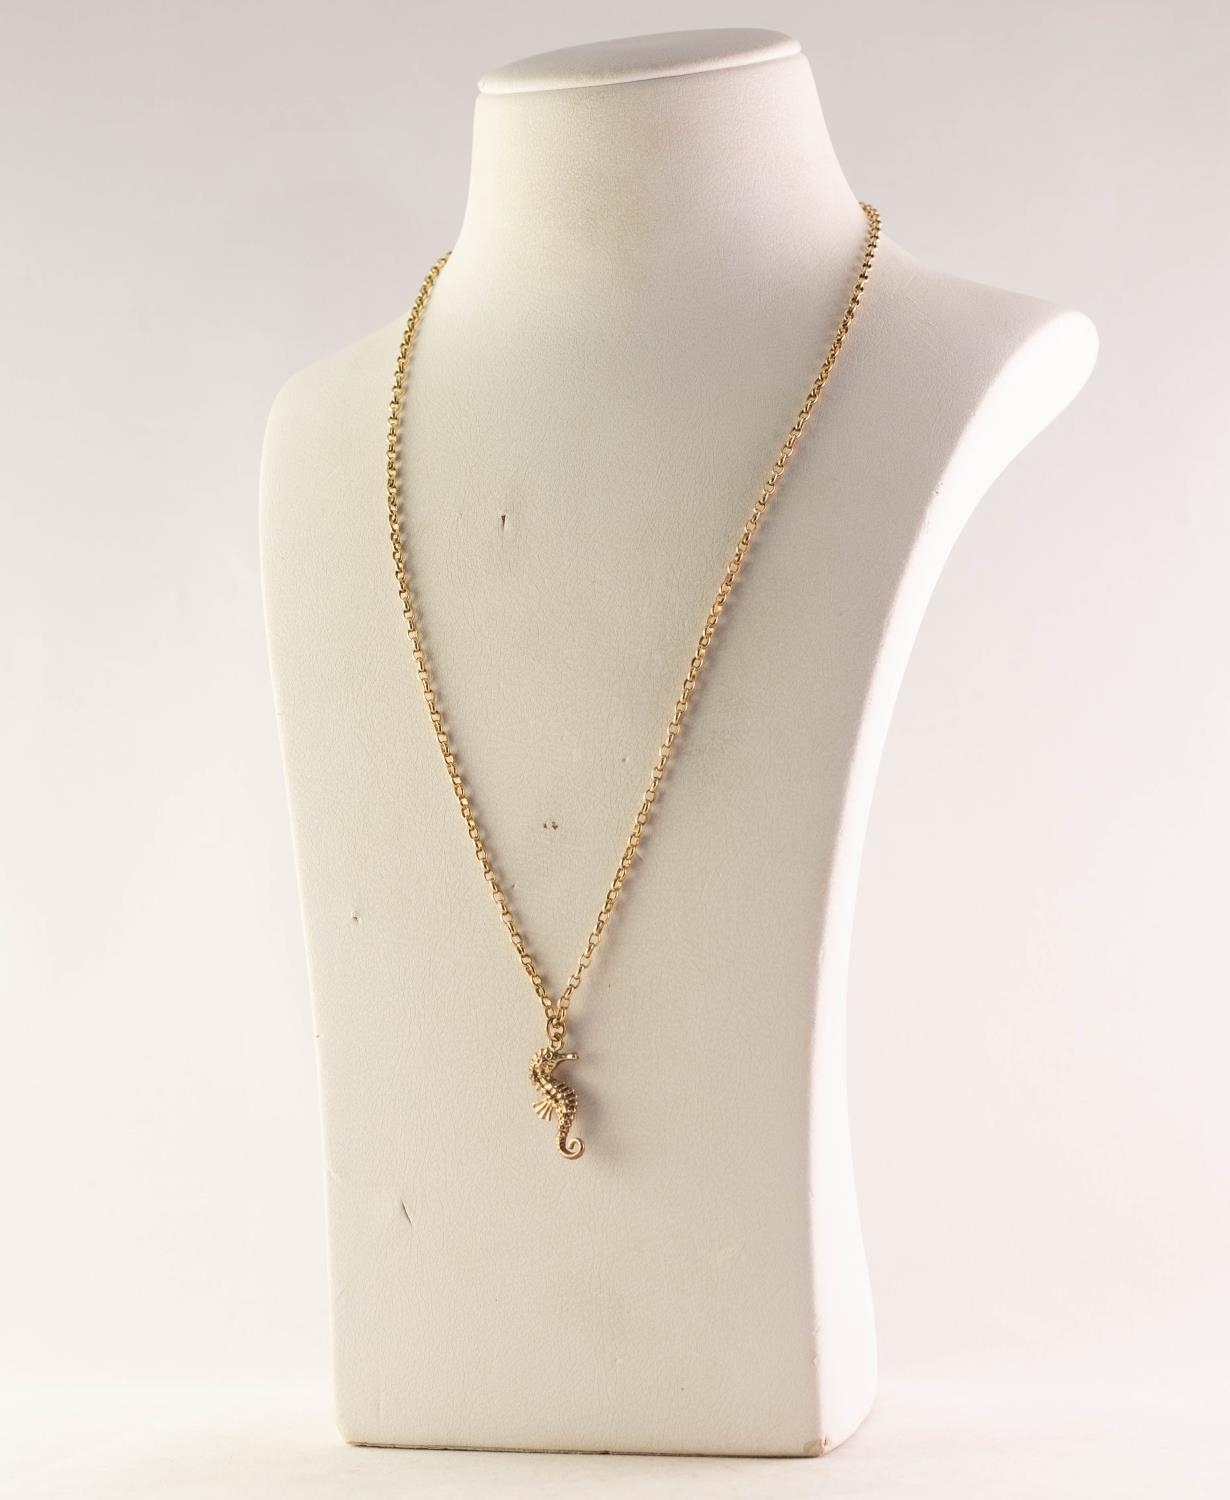 9ct GOLD FINE CHAIN NECKLACE, 20in (51cm) long, 6 gms and the SILVER GILT SEAHORSE PENDANT, in case